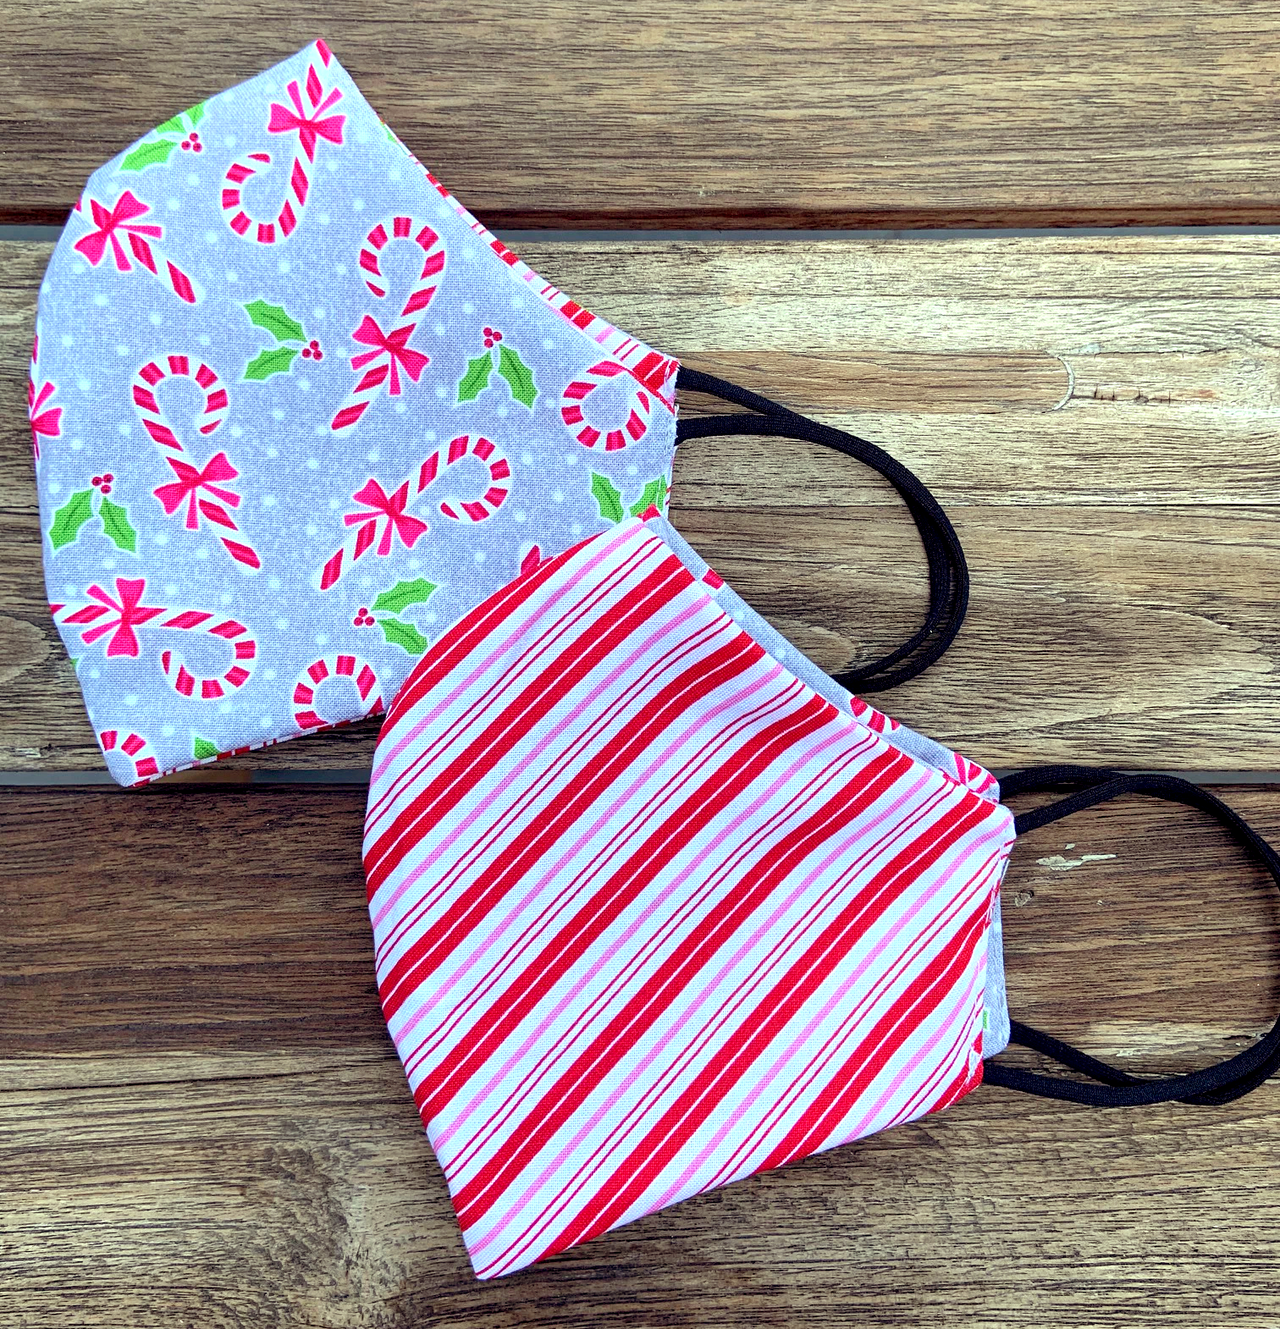 RETROLICIOUS CANDY CANE/CANDY STRIPE REVERSIBLE FACE MASK